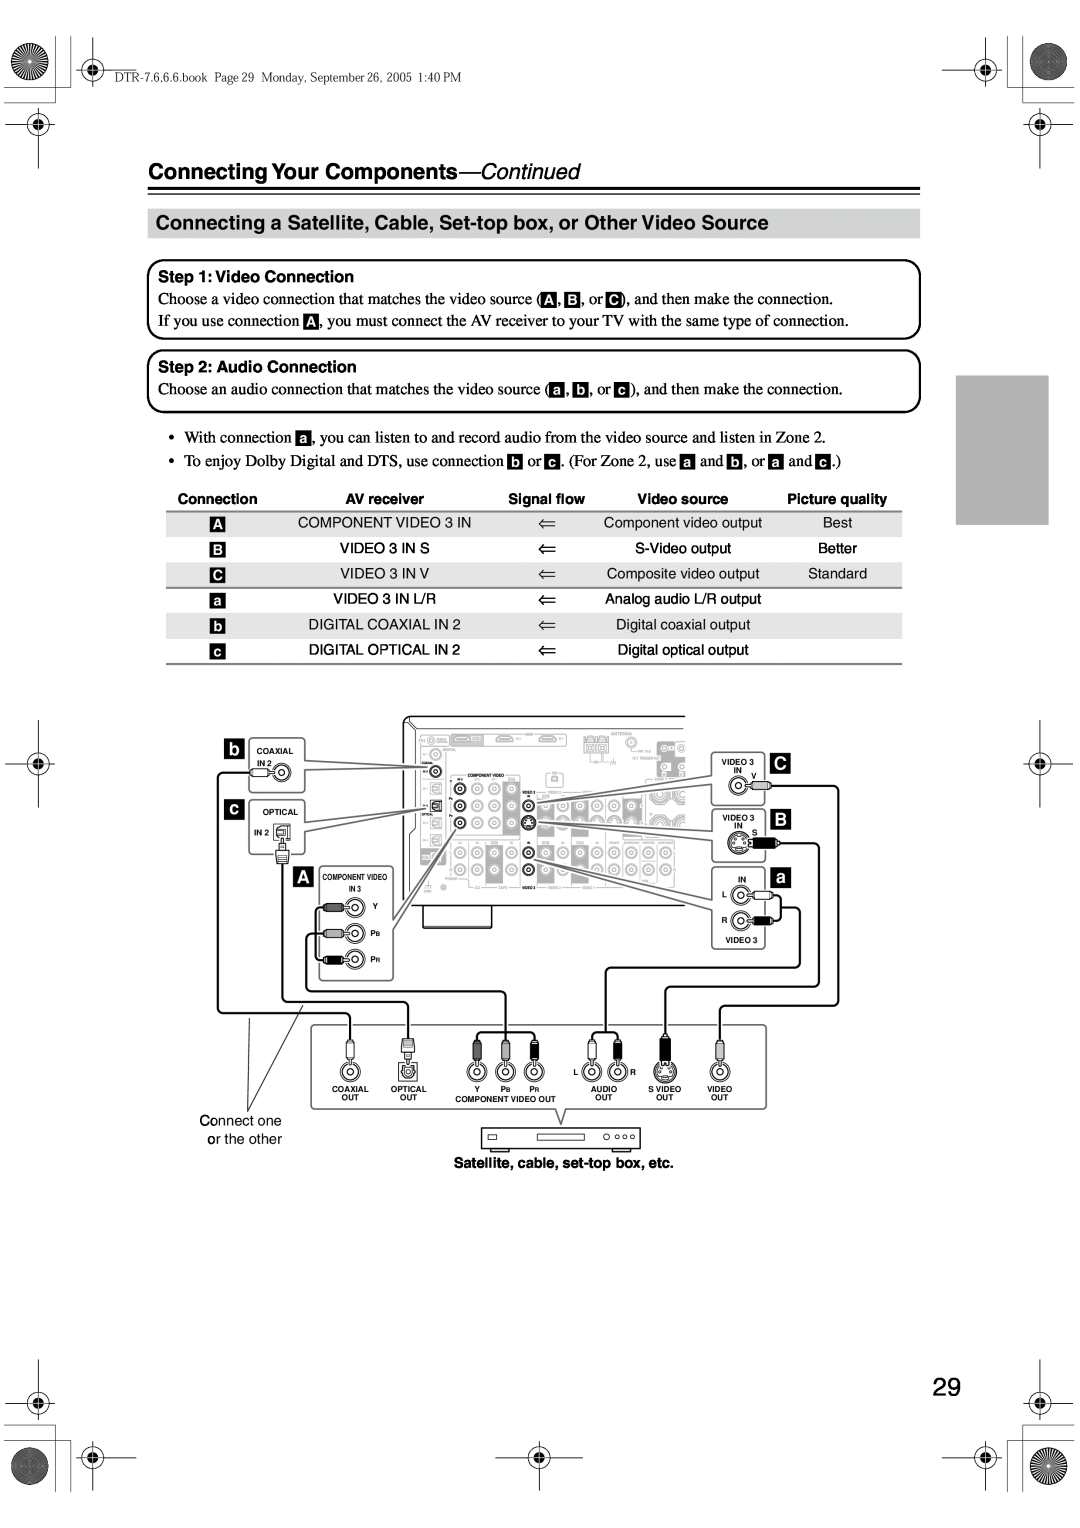 Integra DTR-7.6/6.6 instruction manual Connecting Your Components-Continued, C B a, Satellite, cable, set-topbox, etc 